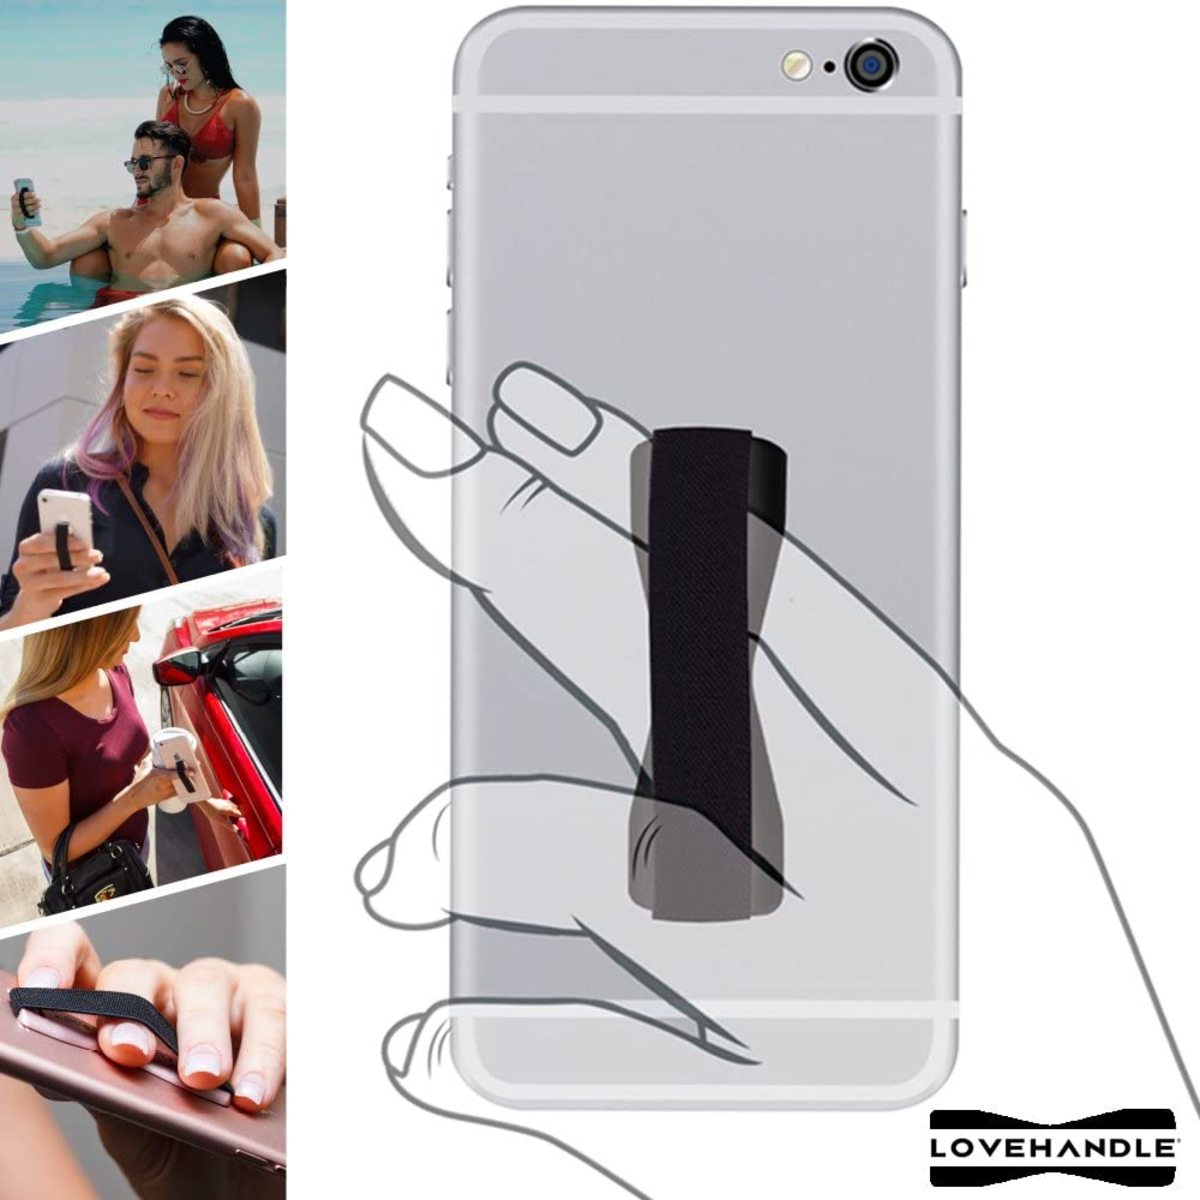 Tired of dropping your phone on your face when tweeting in bed? LoveHandle Cell Phone Grip might be the answer.